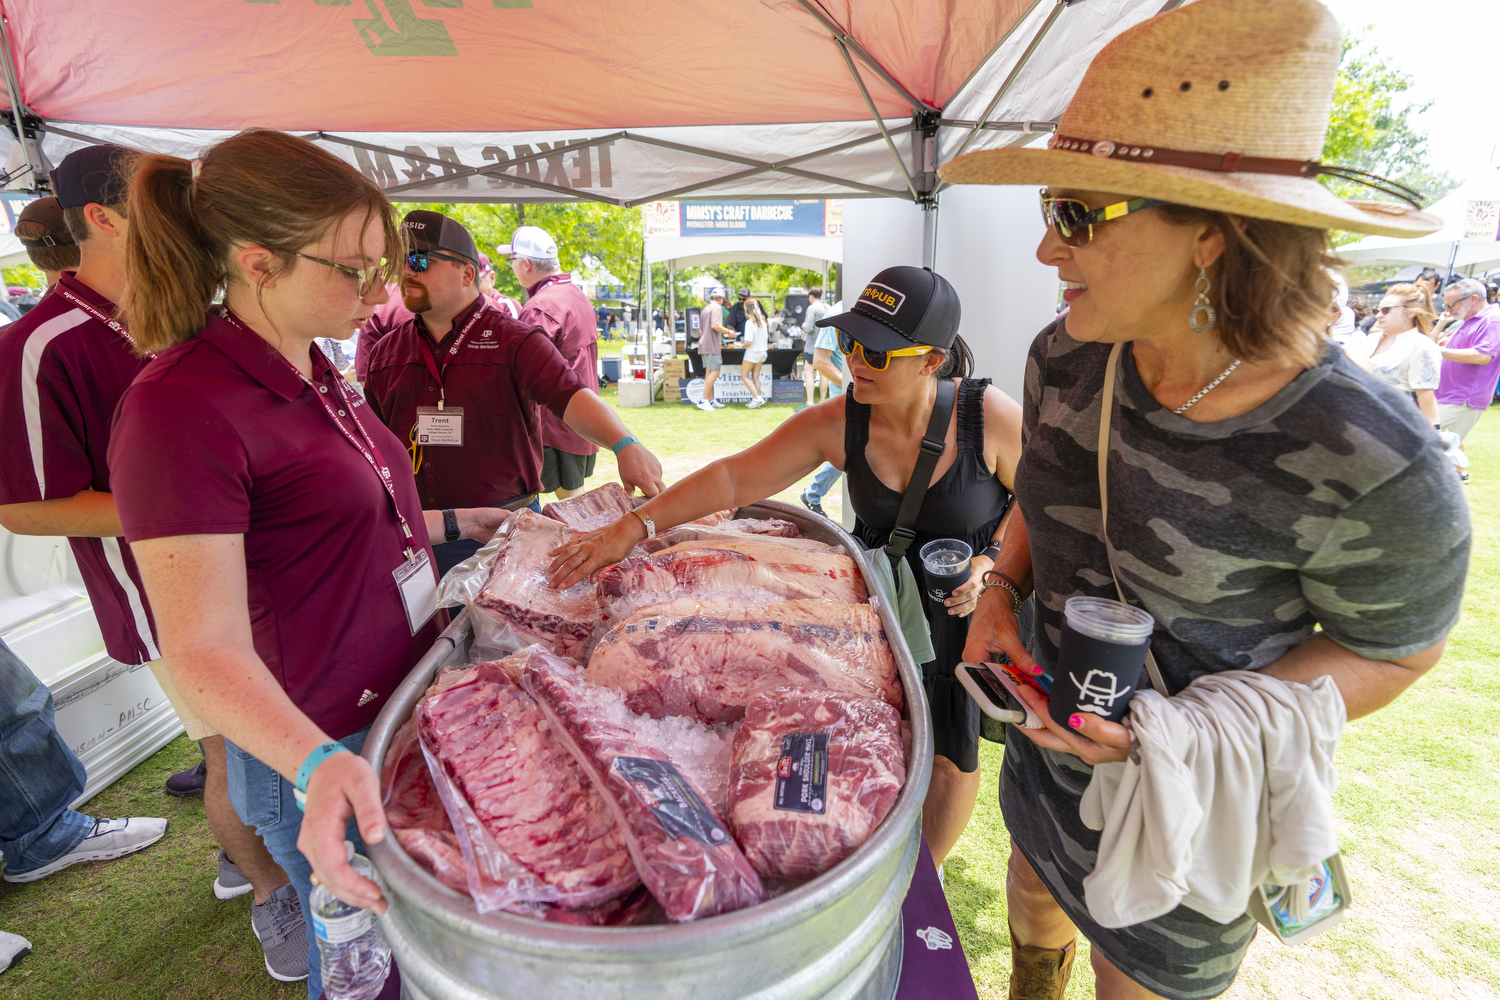 Brisketeers, students bring science to barbecue